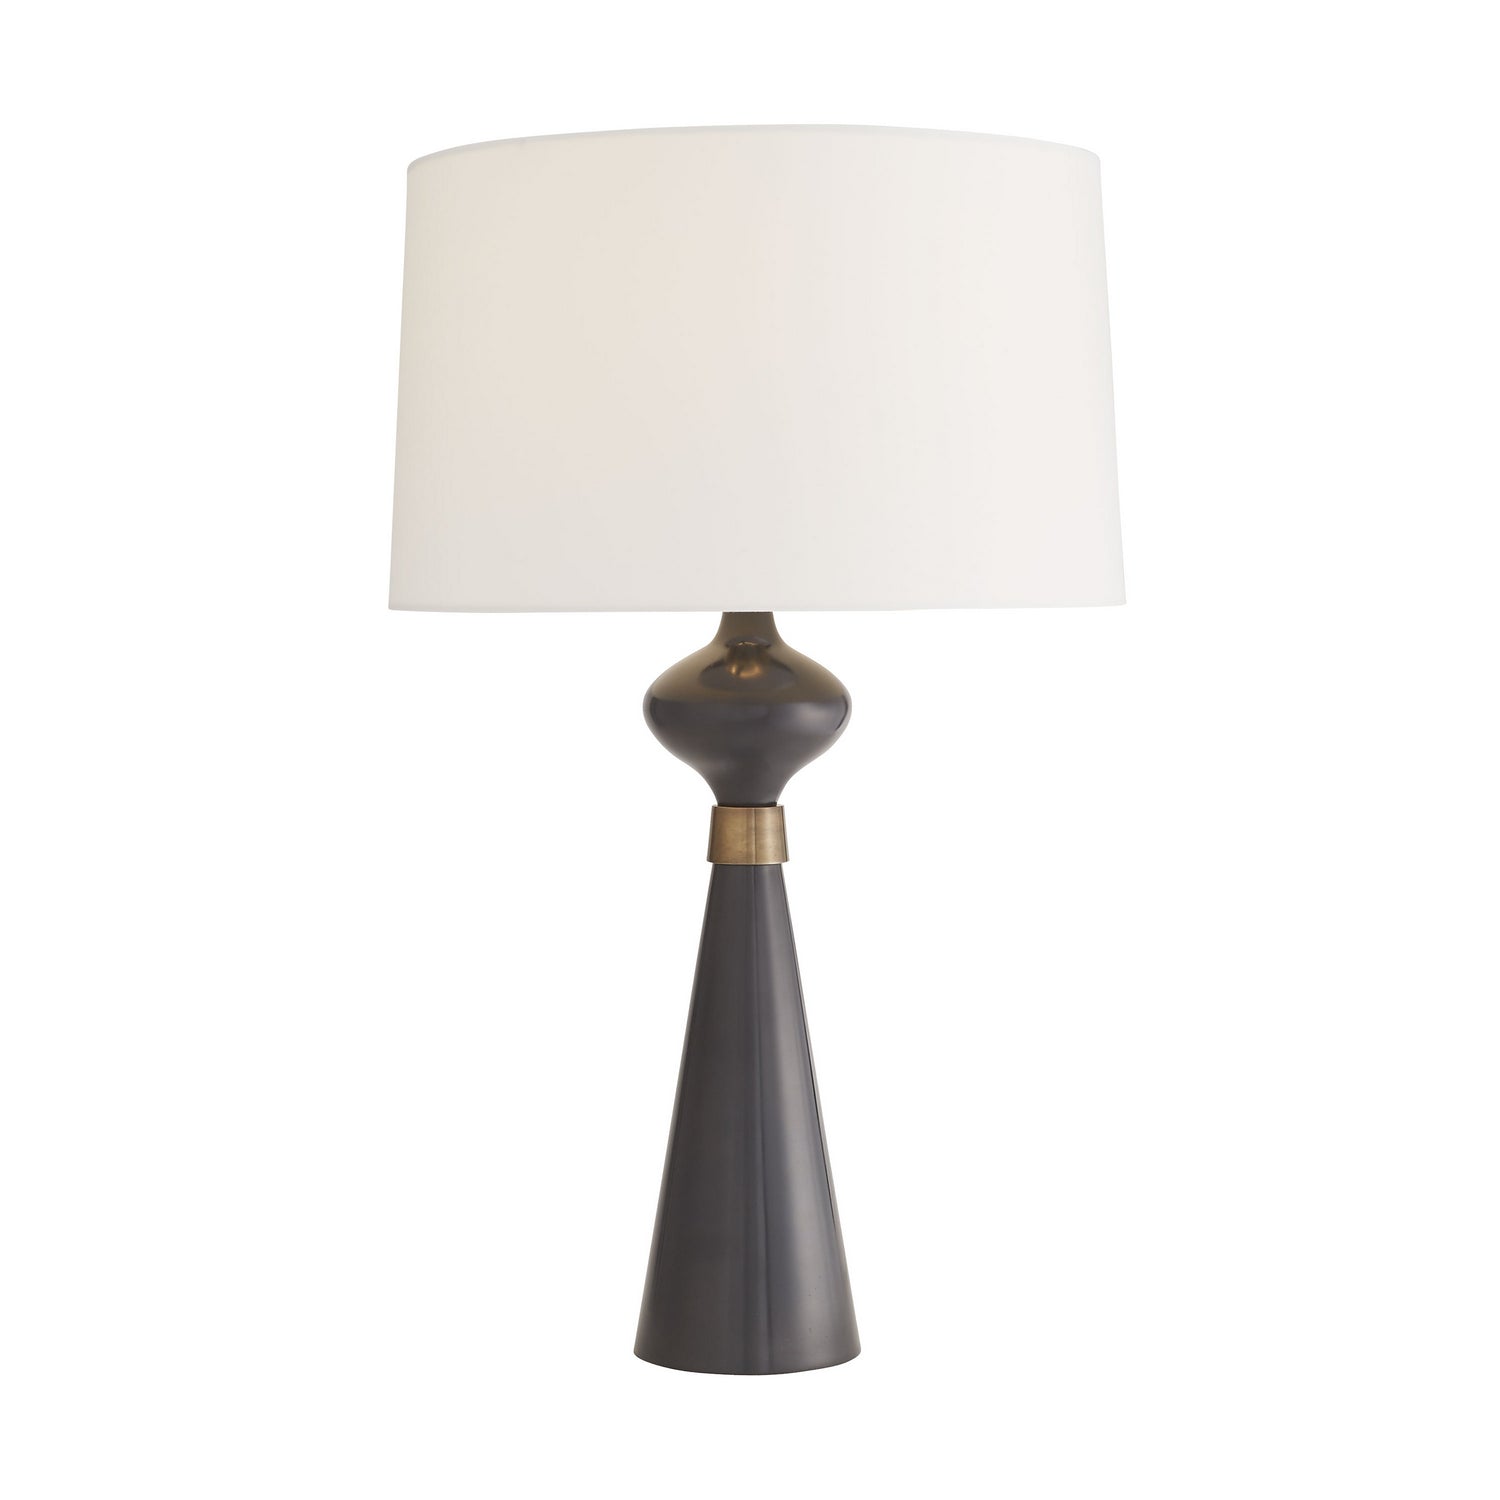 One Light Table Lamp from the Evette collection in Bronze finish